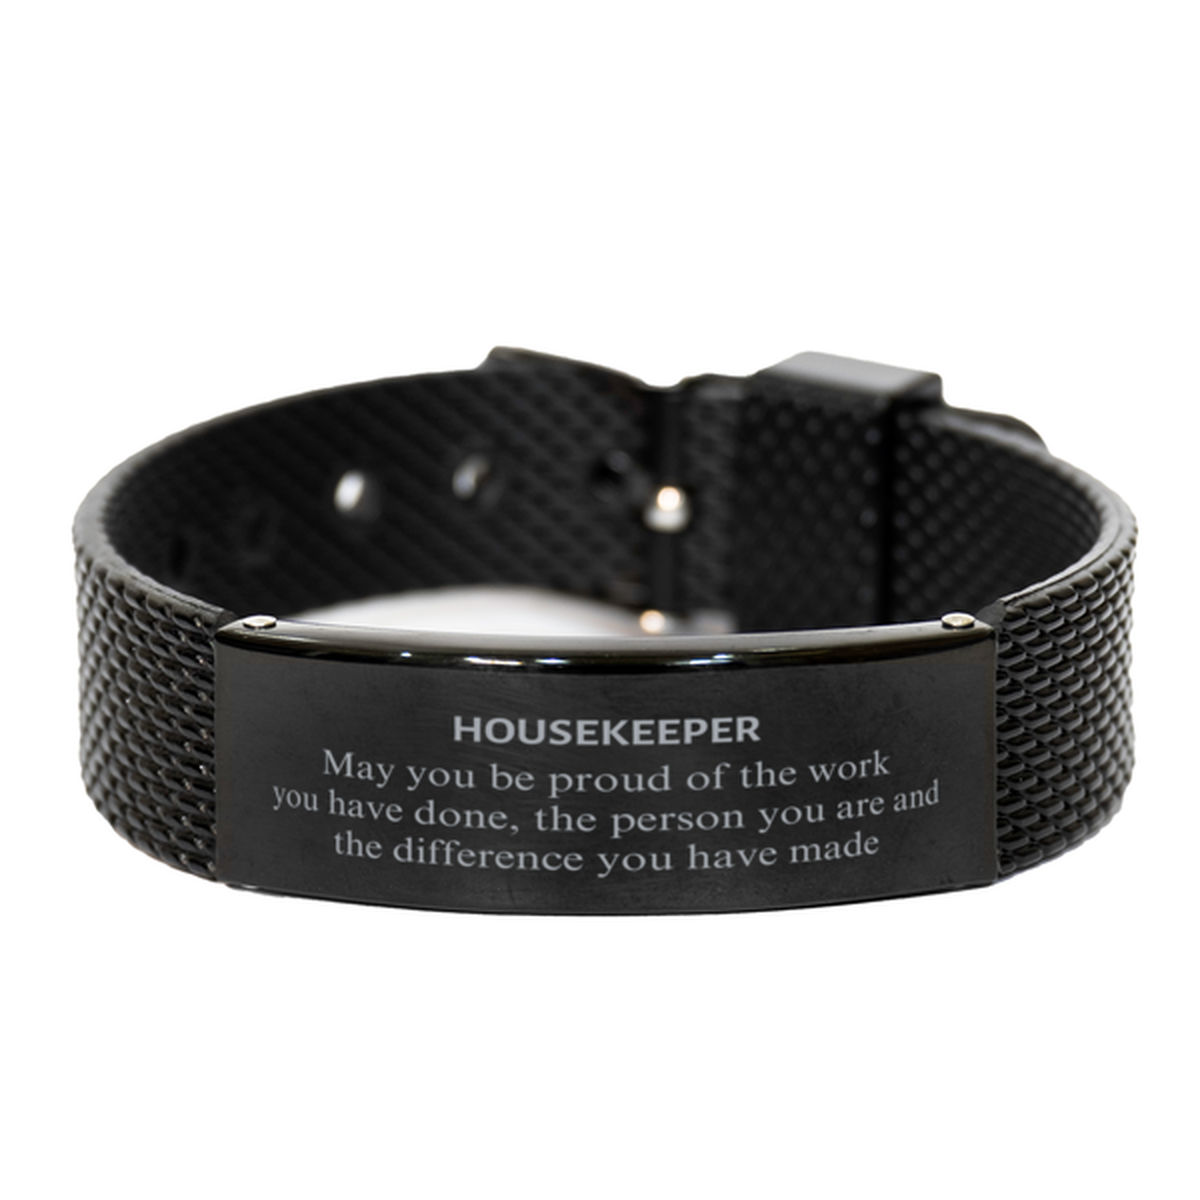 Housekeeper May you be proud of the work you have done, Retirement Housekeeper Black Shark Mesh Bracelet for Colleague Appreciation Gifts Amazing for Housekeeper